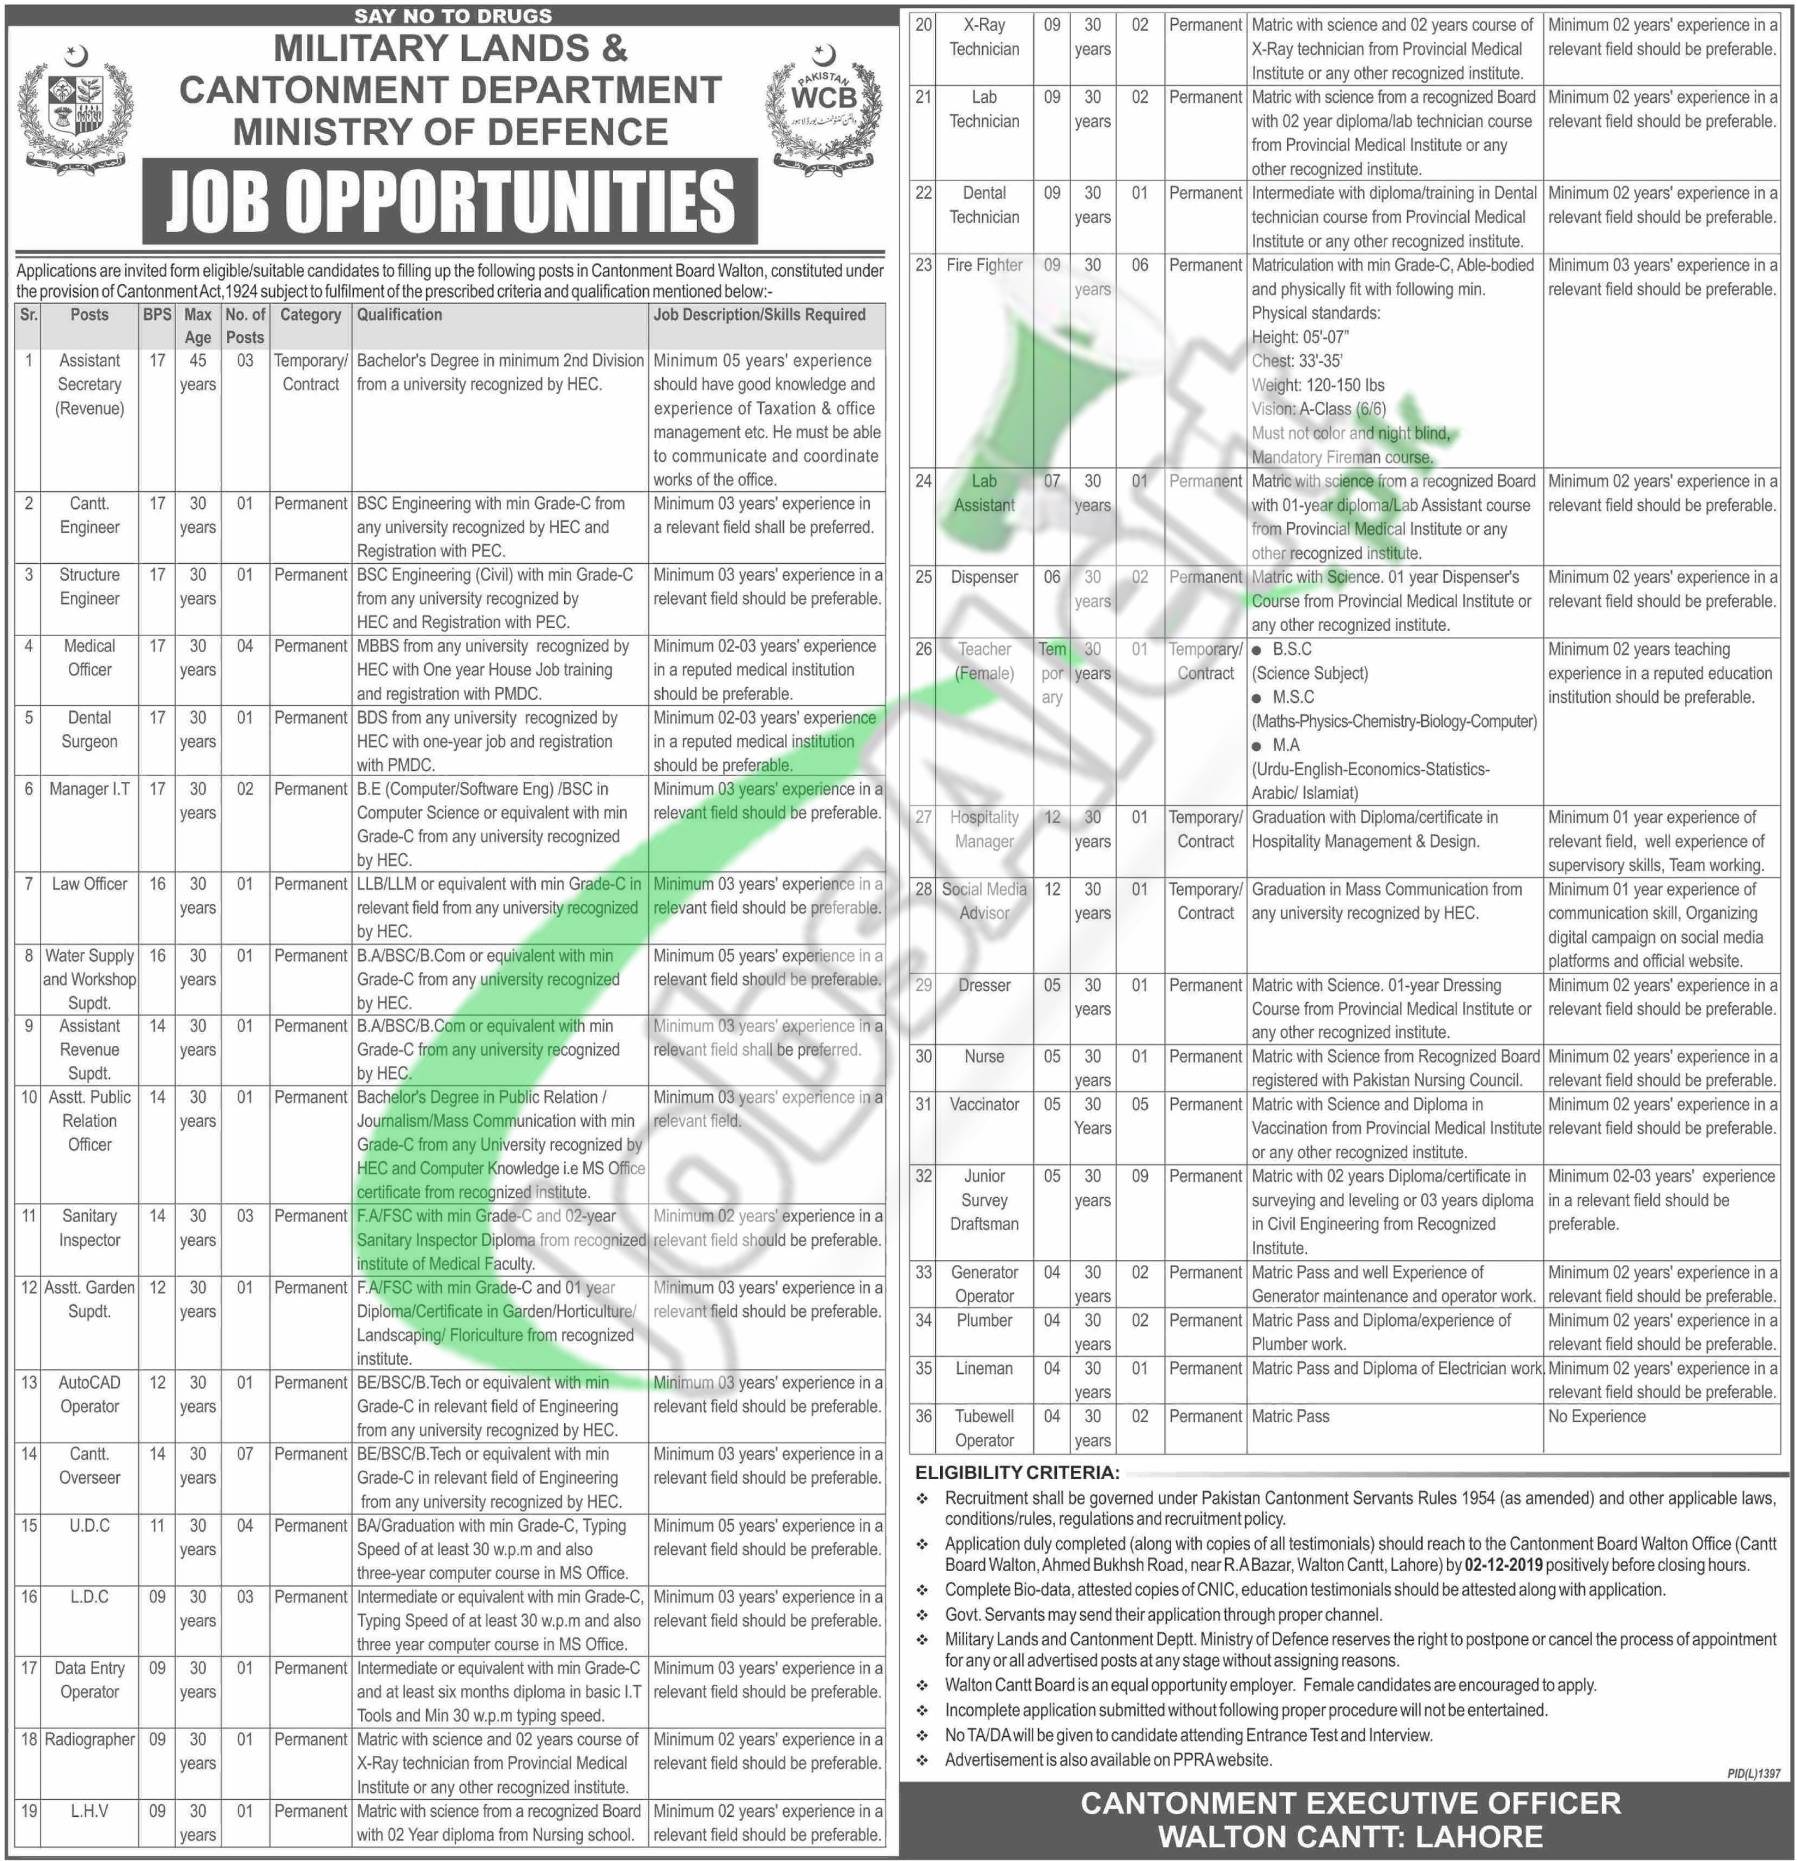 Military Lands & Cantonment Department Jobs 2019